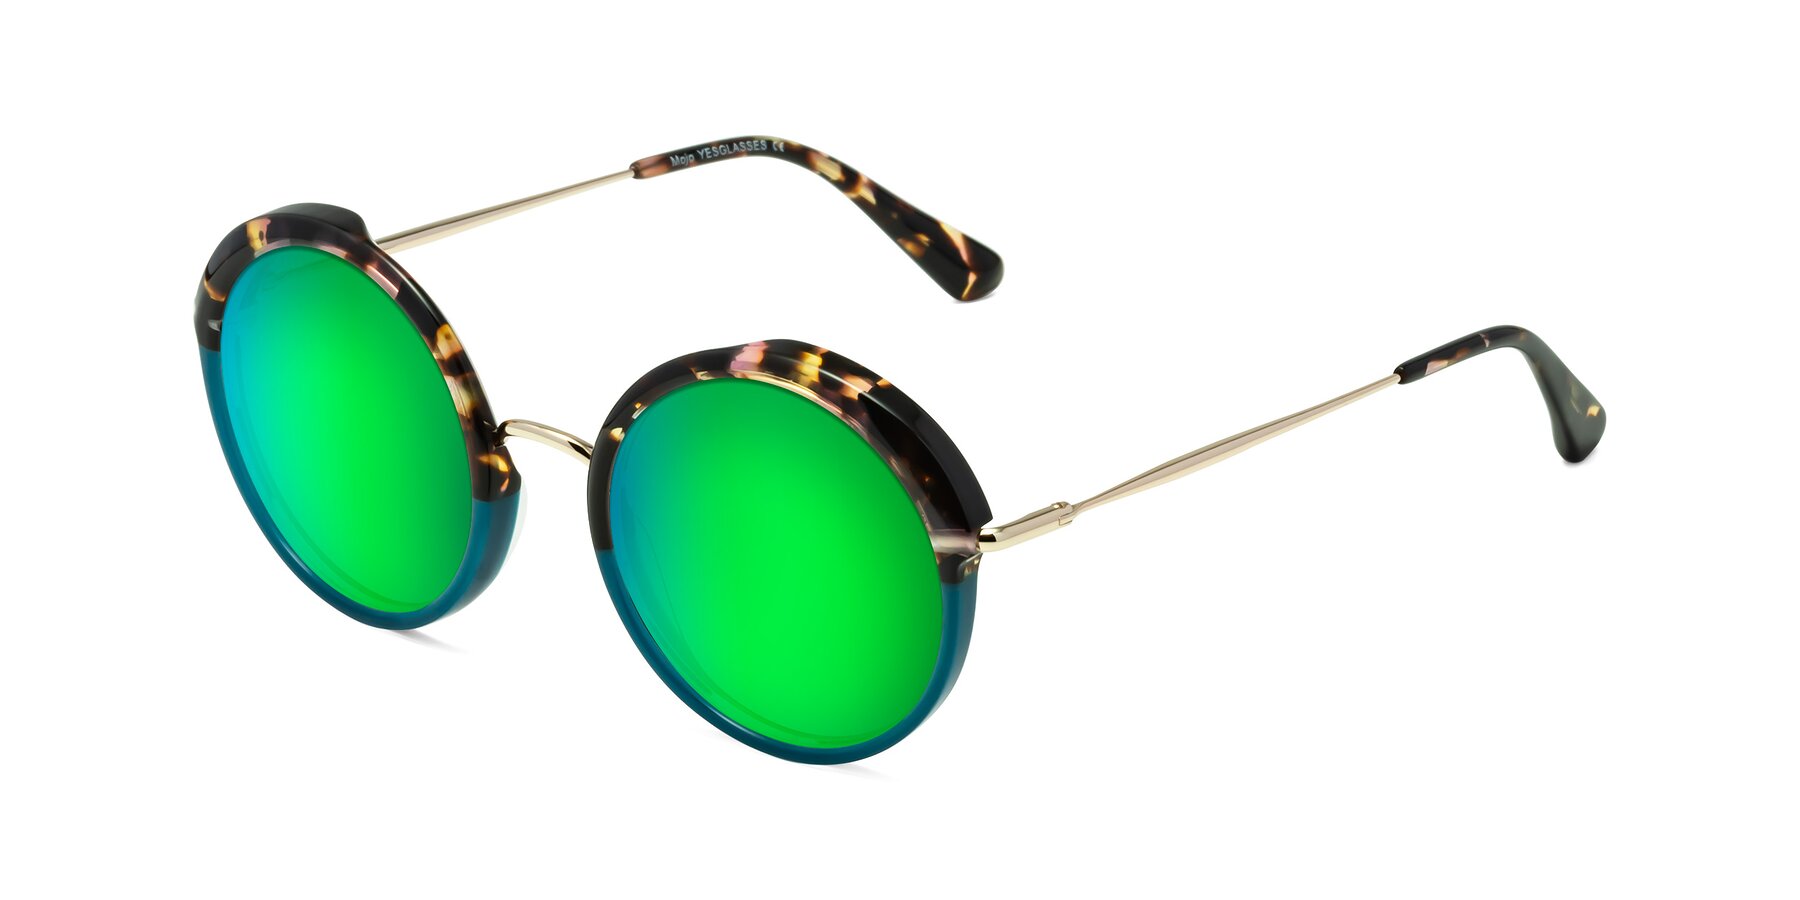 Angle of Mojo in Floral-Teal with Green Mirrored Lenses